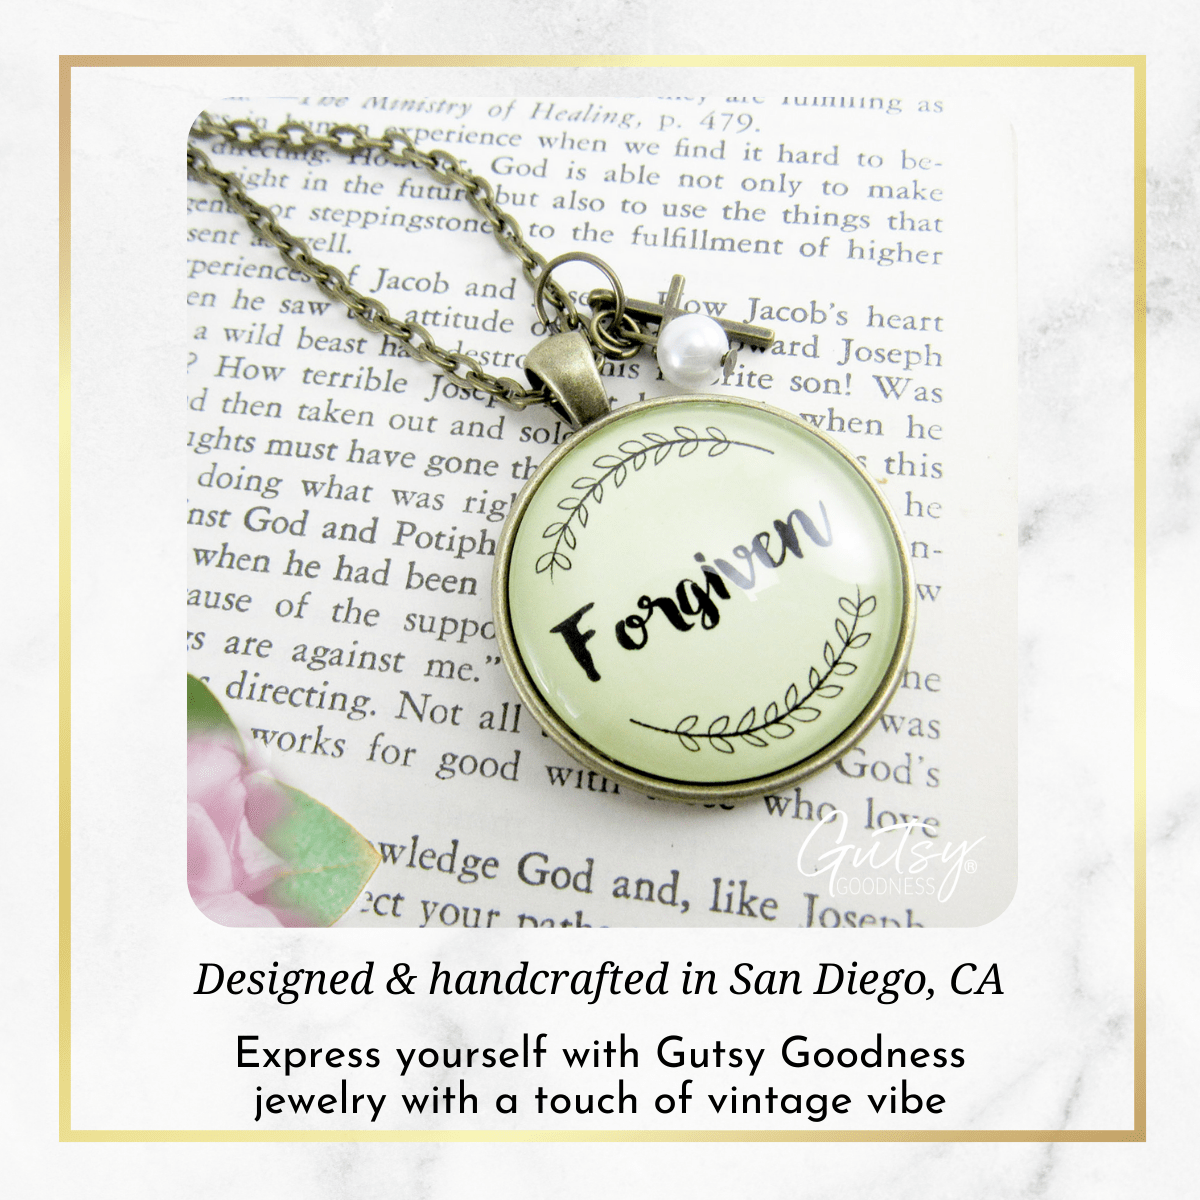 Gutsy Goodness Forgiven Necklace Faith Inspired Christian Womens Cross Charm Jewelry - Gutsy Goodness Handmade Jewelry;Forgiven Necklace Faith Inspired Christian Womens Cross Charm Jewelry - Gutsy Goodness Handmade Jewelry Gifts